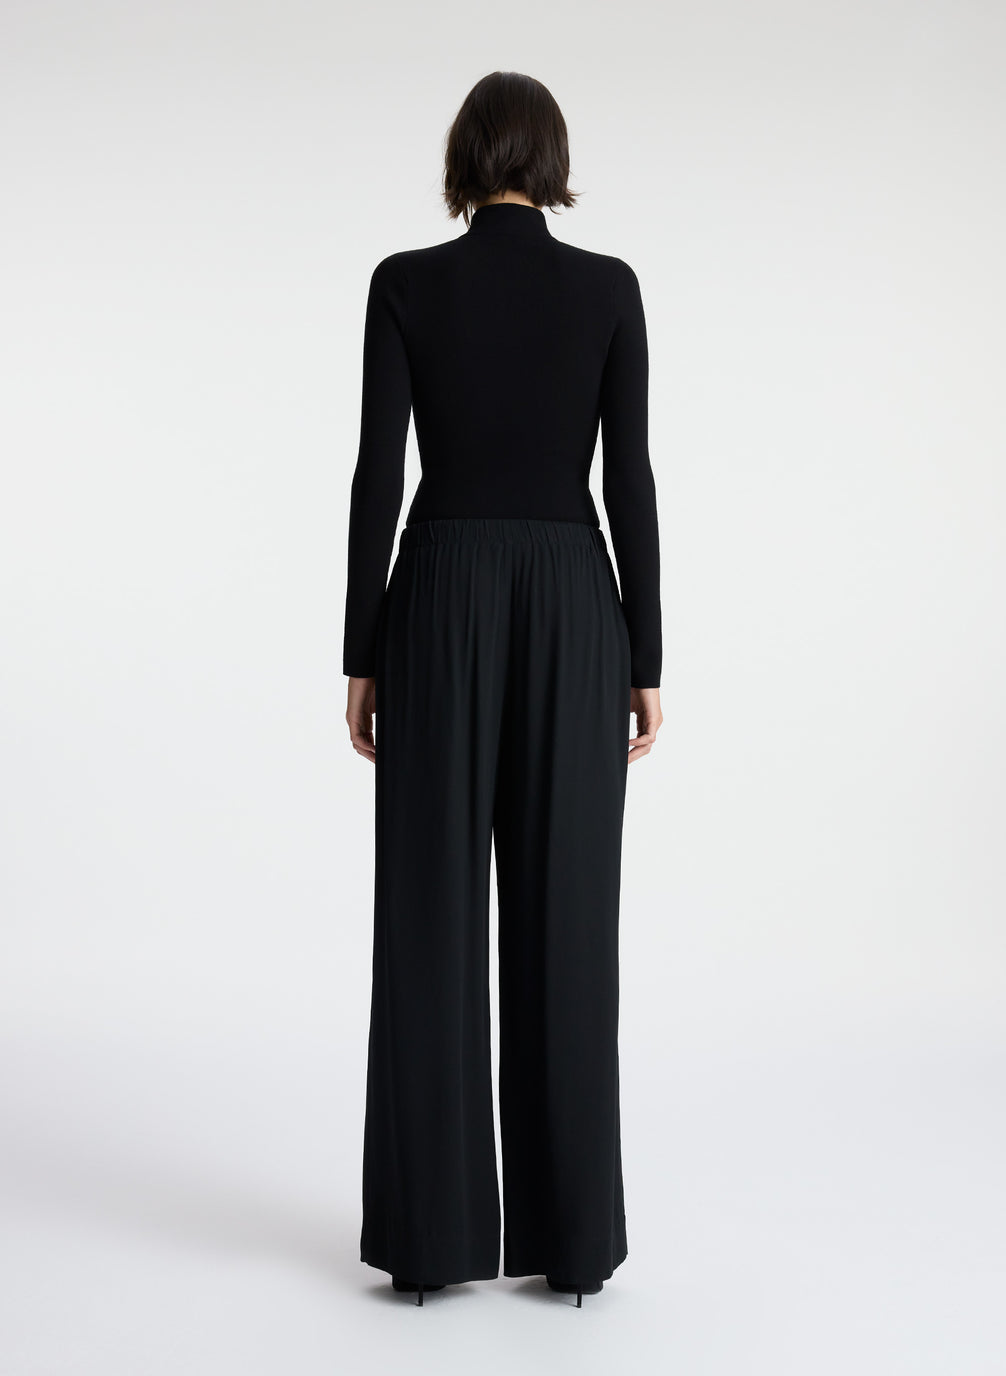 back view of woman wearing black knit top and black wide leg pants